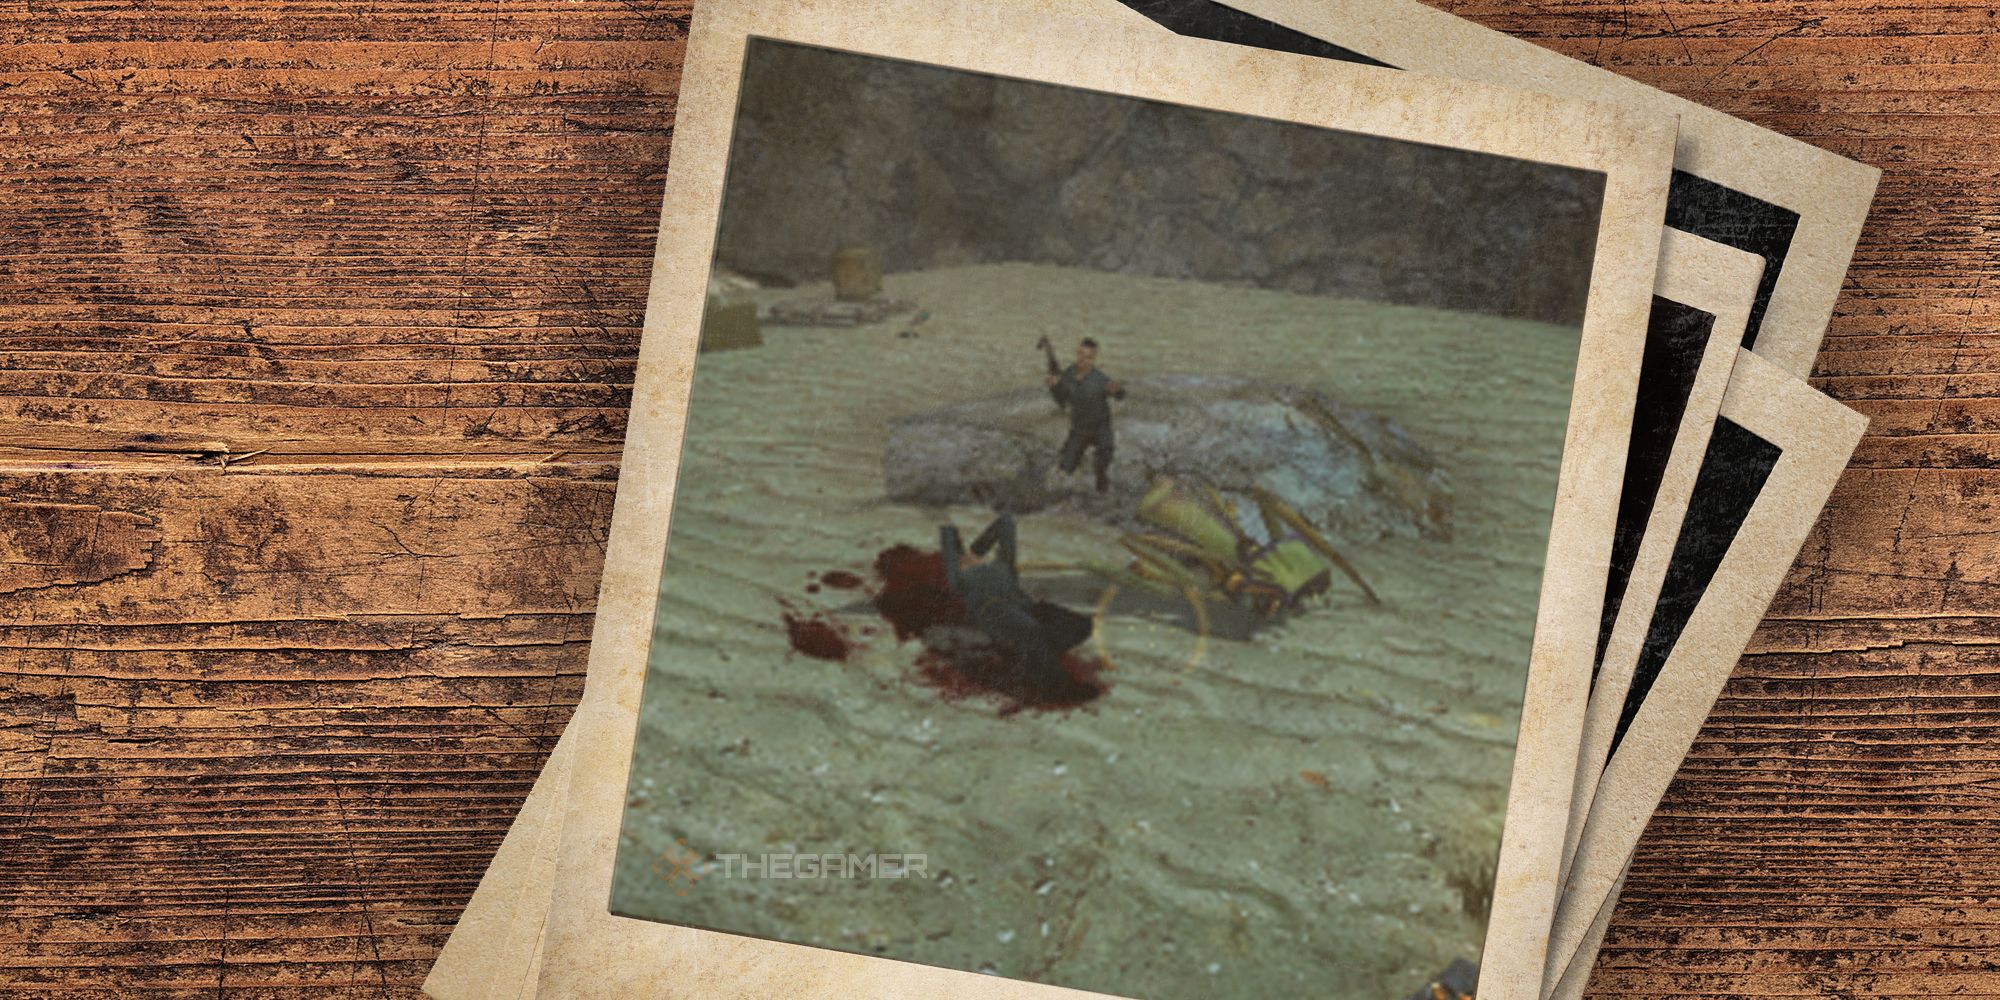 Polaroid photo showing Half-Life 2's Don't Step on the Sand moment in which Laszlo is bleeding out next to a dead Antlion beside his friend on a rock